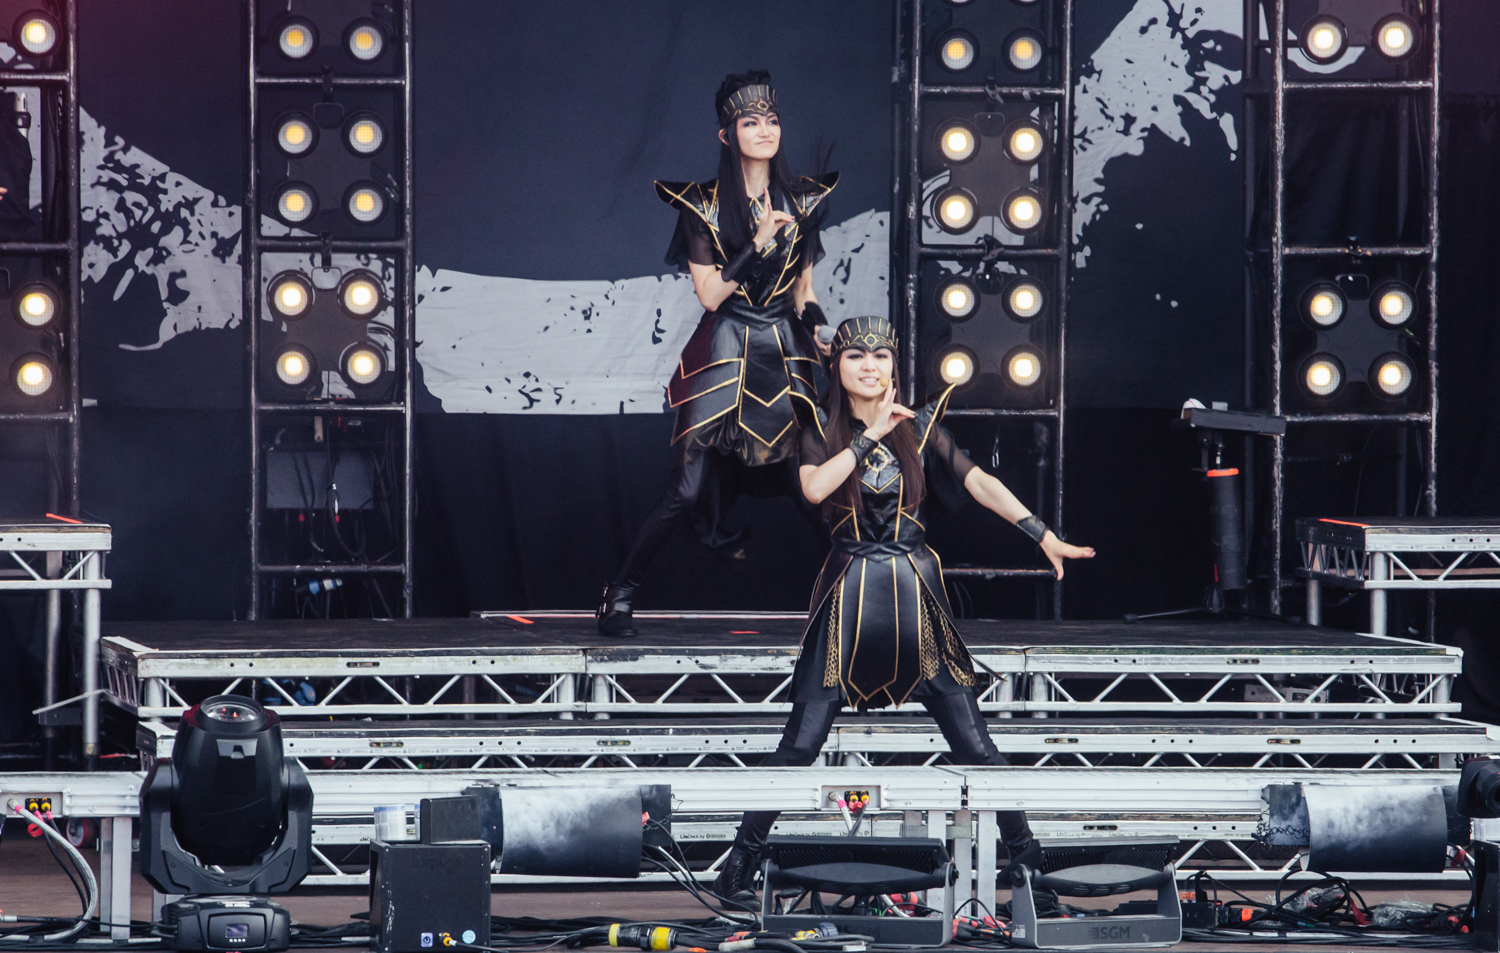 BABYMETAL performing as a duo during the Dark Side